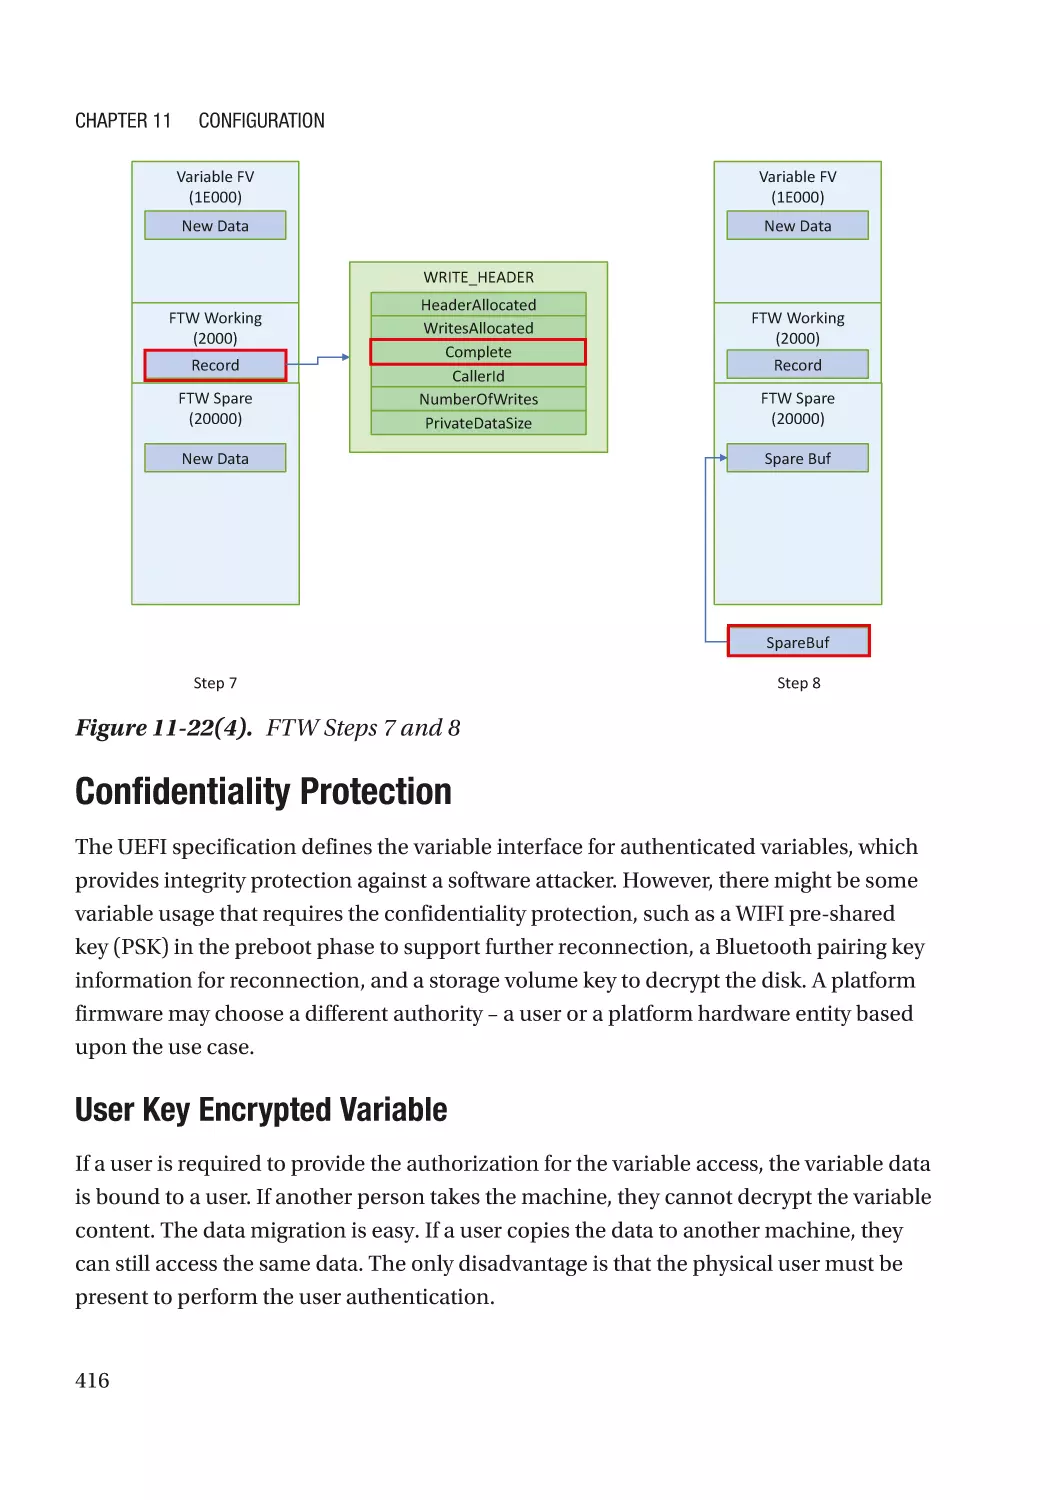 Confidentiality Protection
User Key Encrypted Variable